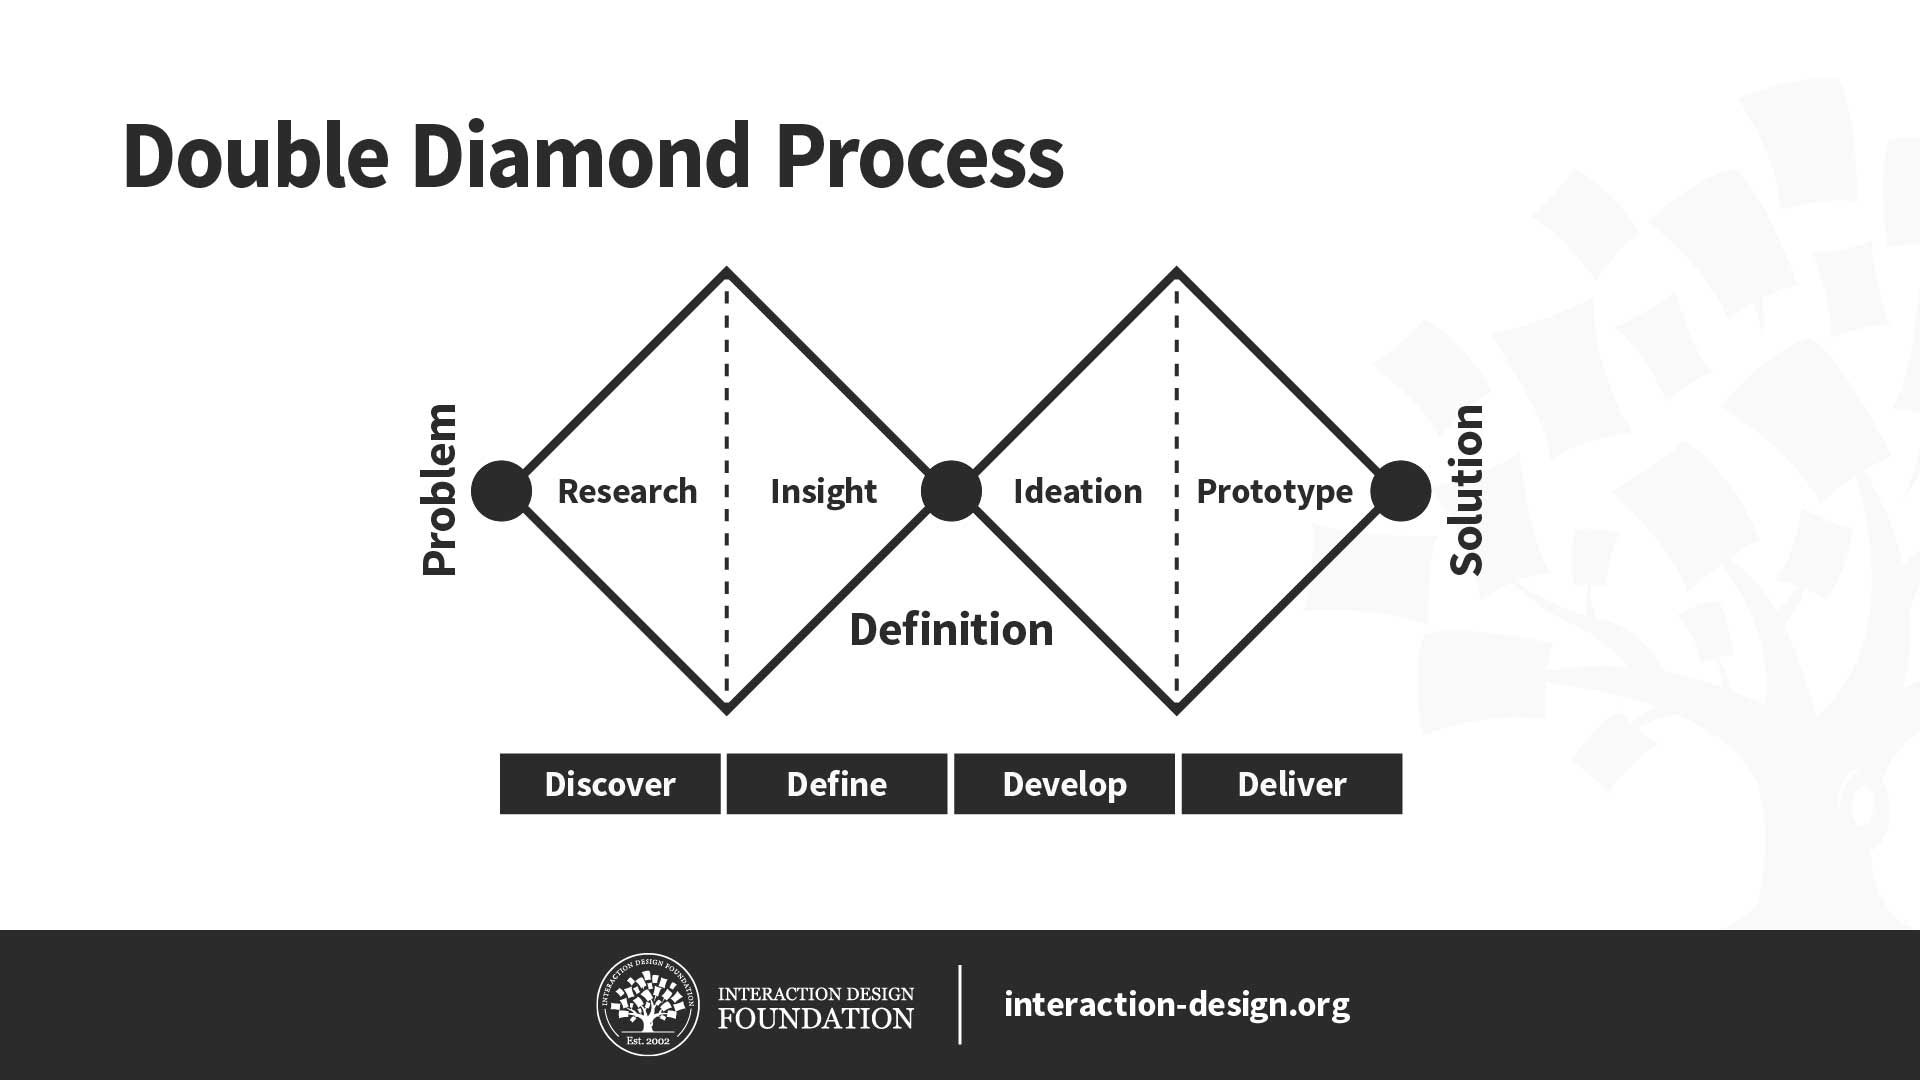 Illustration showing the Double Diamond Design Process. Discover, Define, Develop, and Deliver.